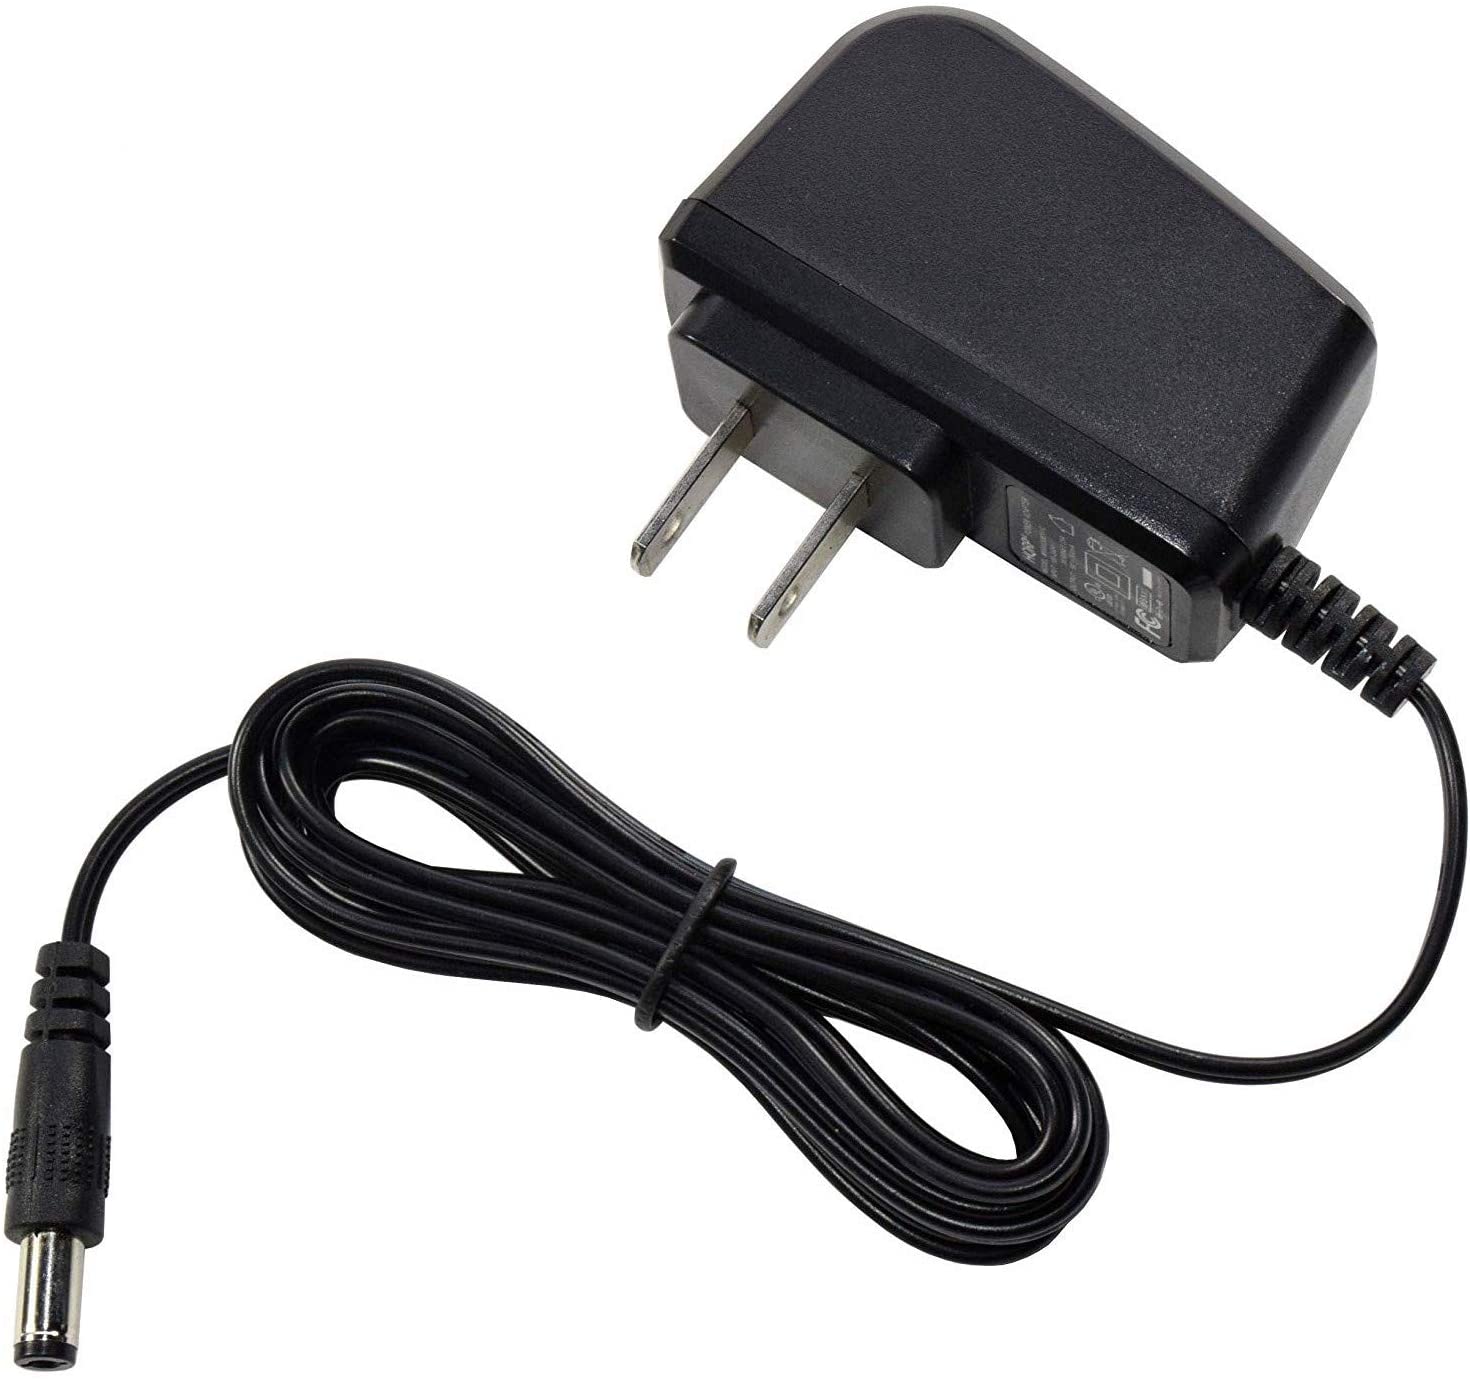 HQRP AC Adapter / Power Supply compatible with Ibanez PM7 PHASE MODULATOR W/3 MODES / SB7 SYNTHESIZER BASS Guitar Effects pedals